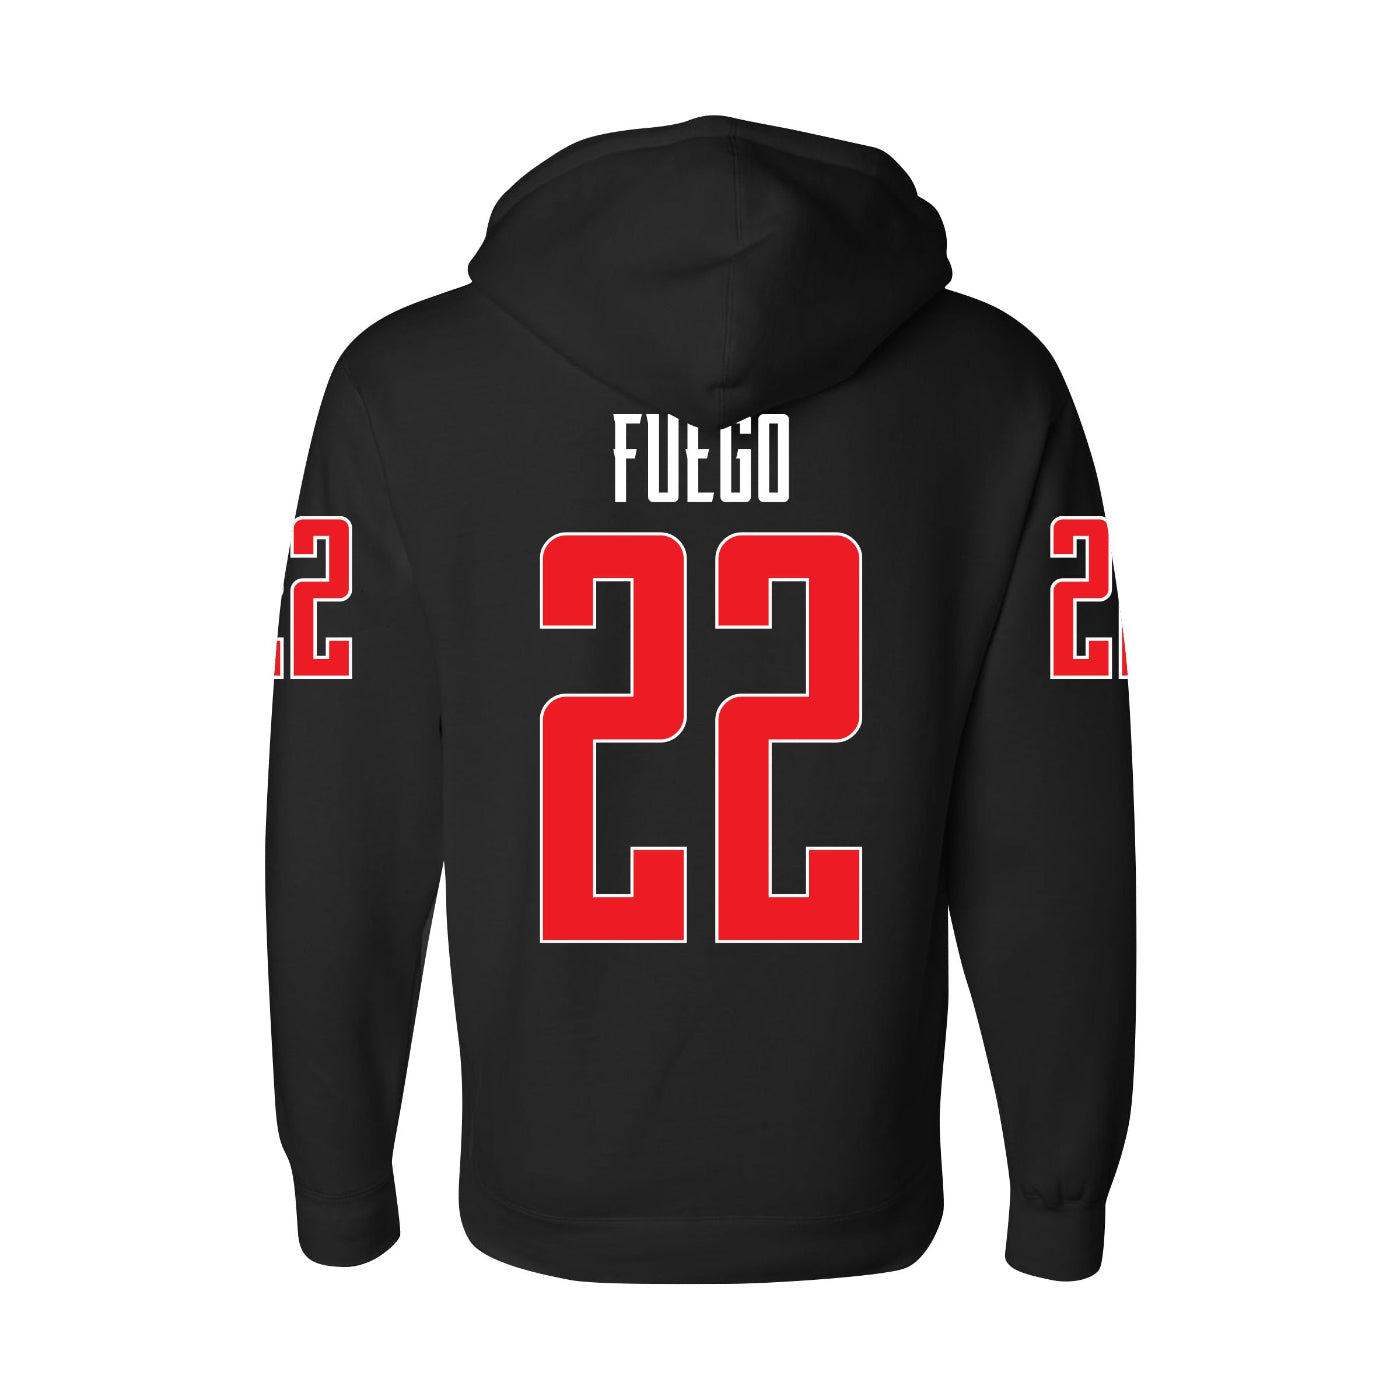 Coachella Valley Firebirds Fuego Name and Number Hoodie